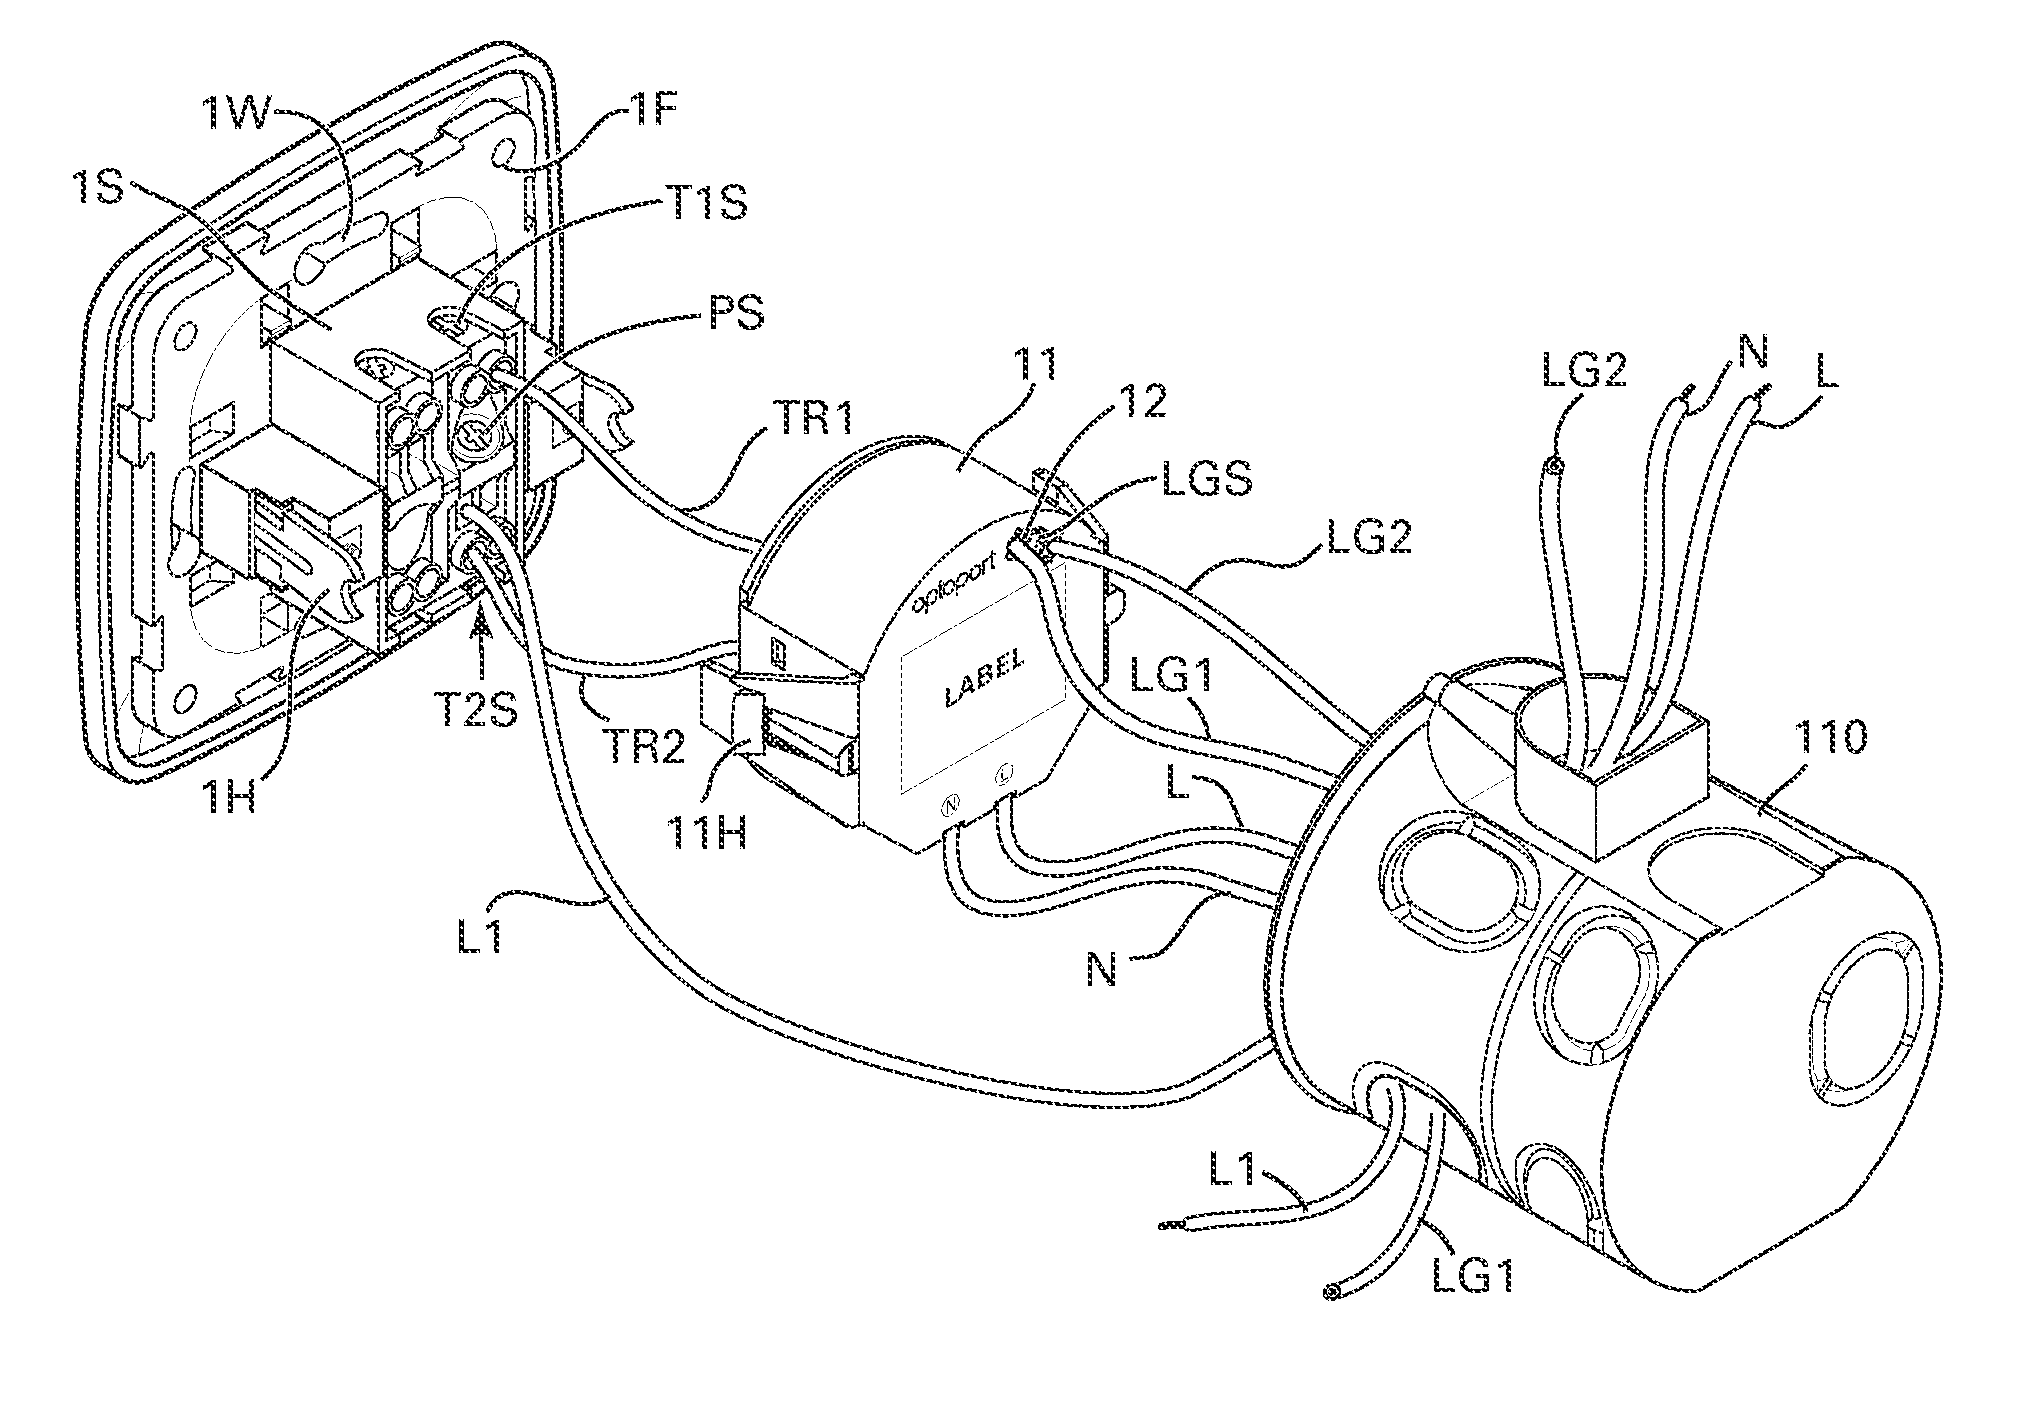 Method and Apparatus for Combining AC Power Relay and Current Sensors with AC Wiring Devices